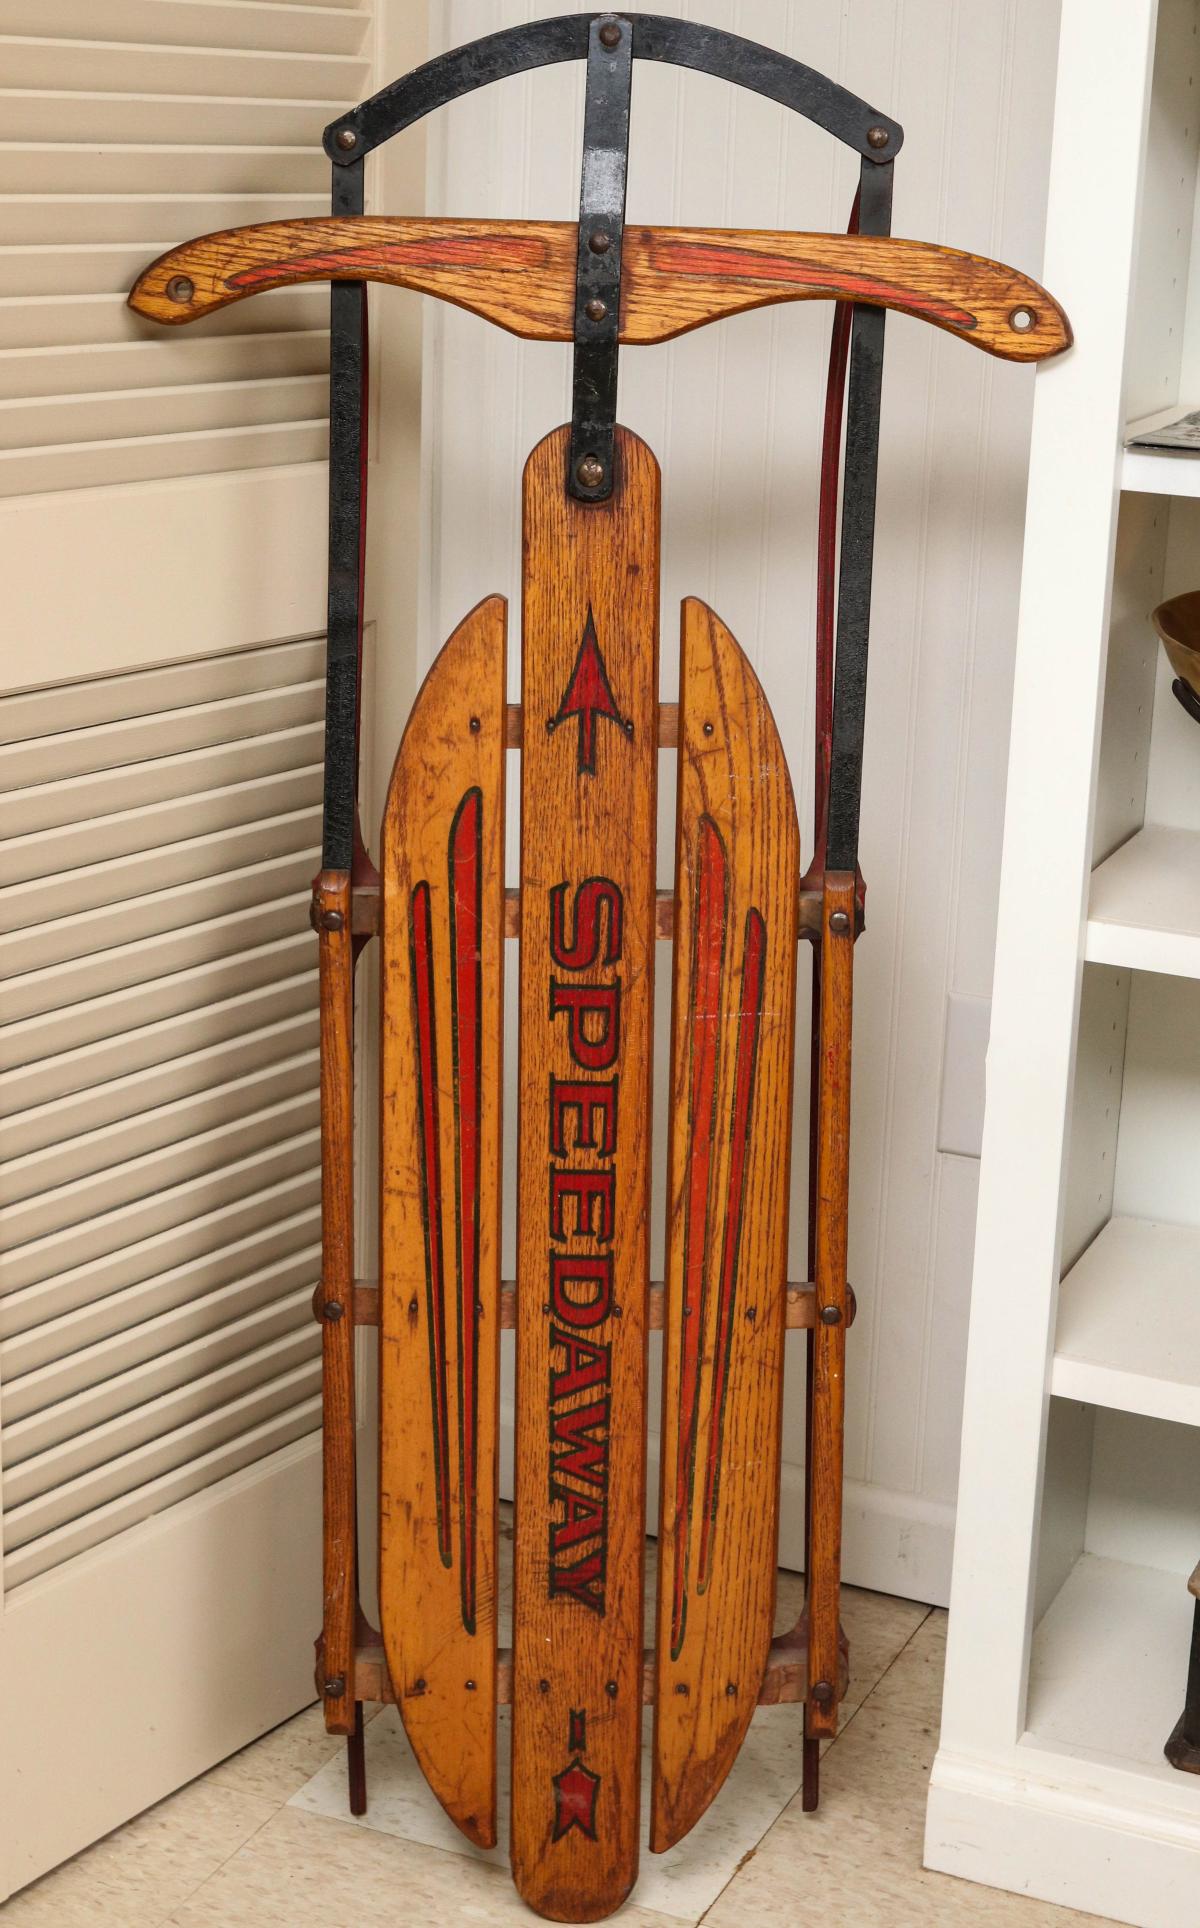 A SPEEDWAY VINTAGE WOOD & IRON SNOW SLED